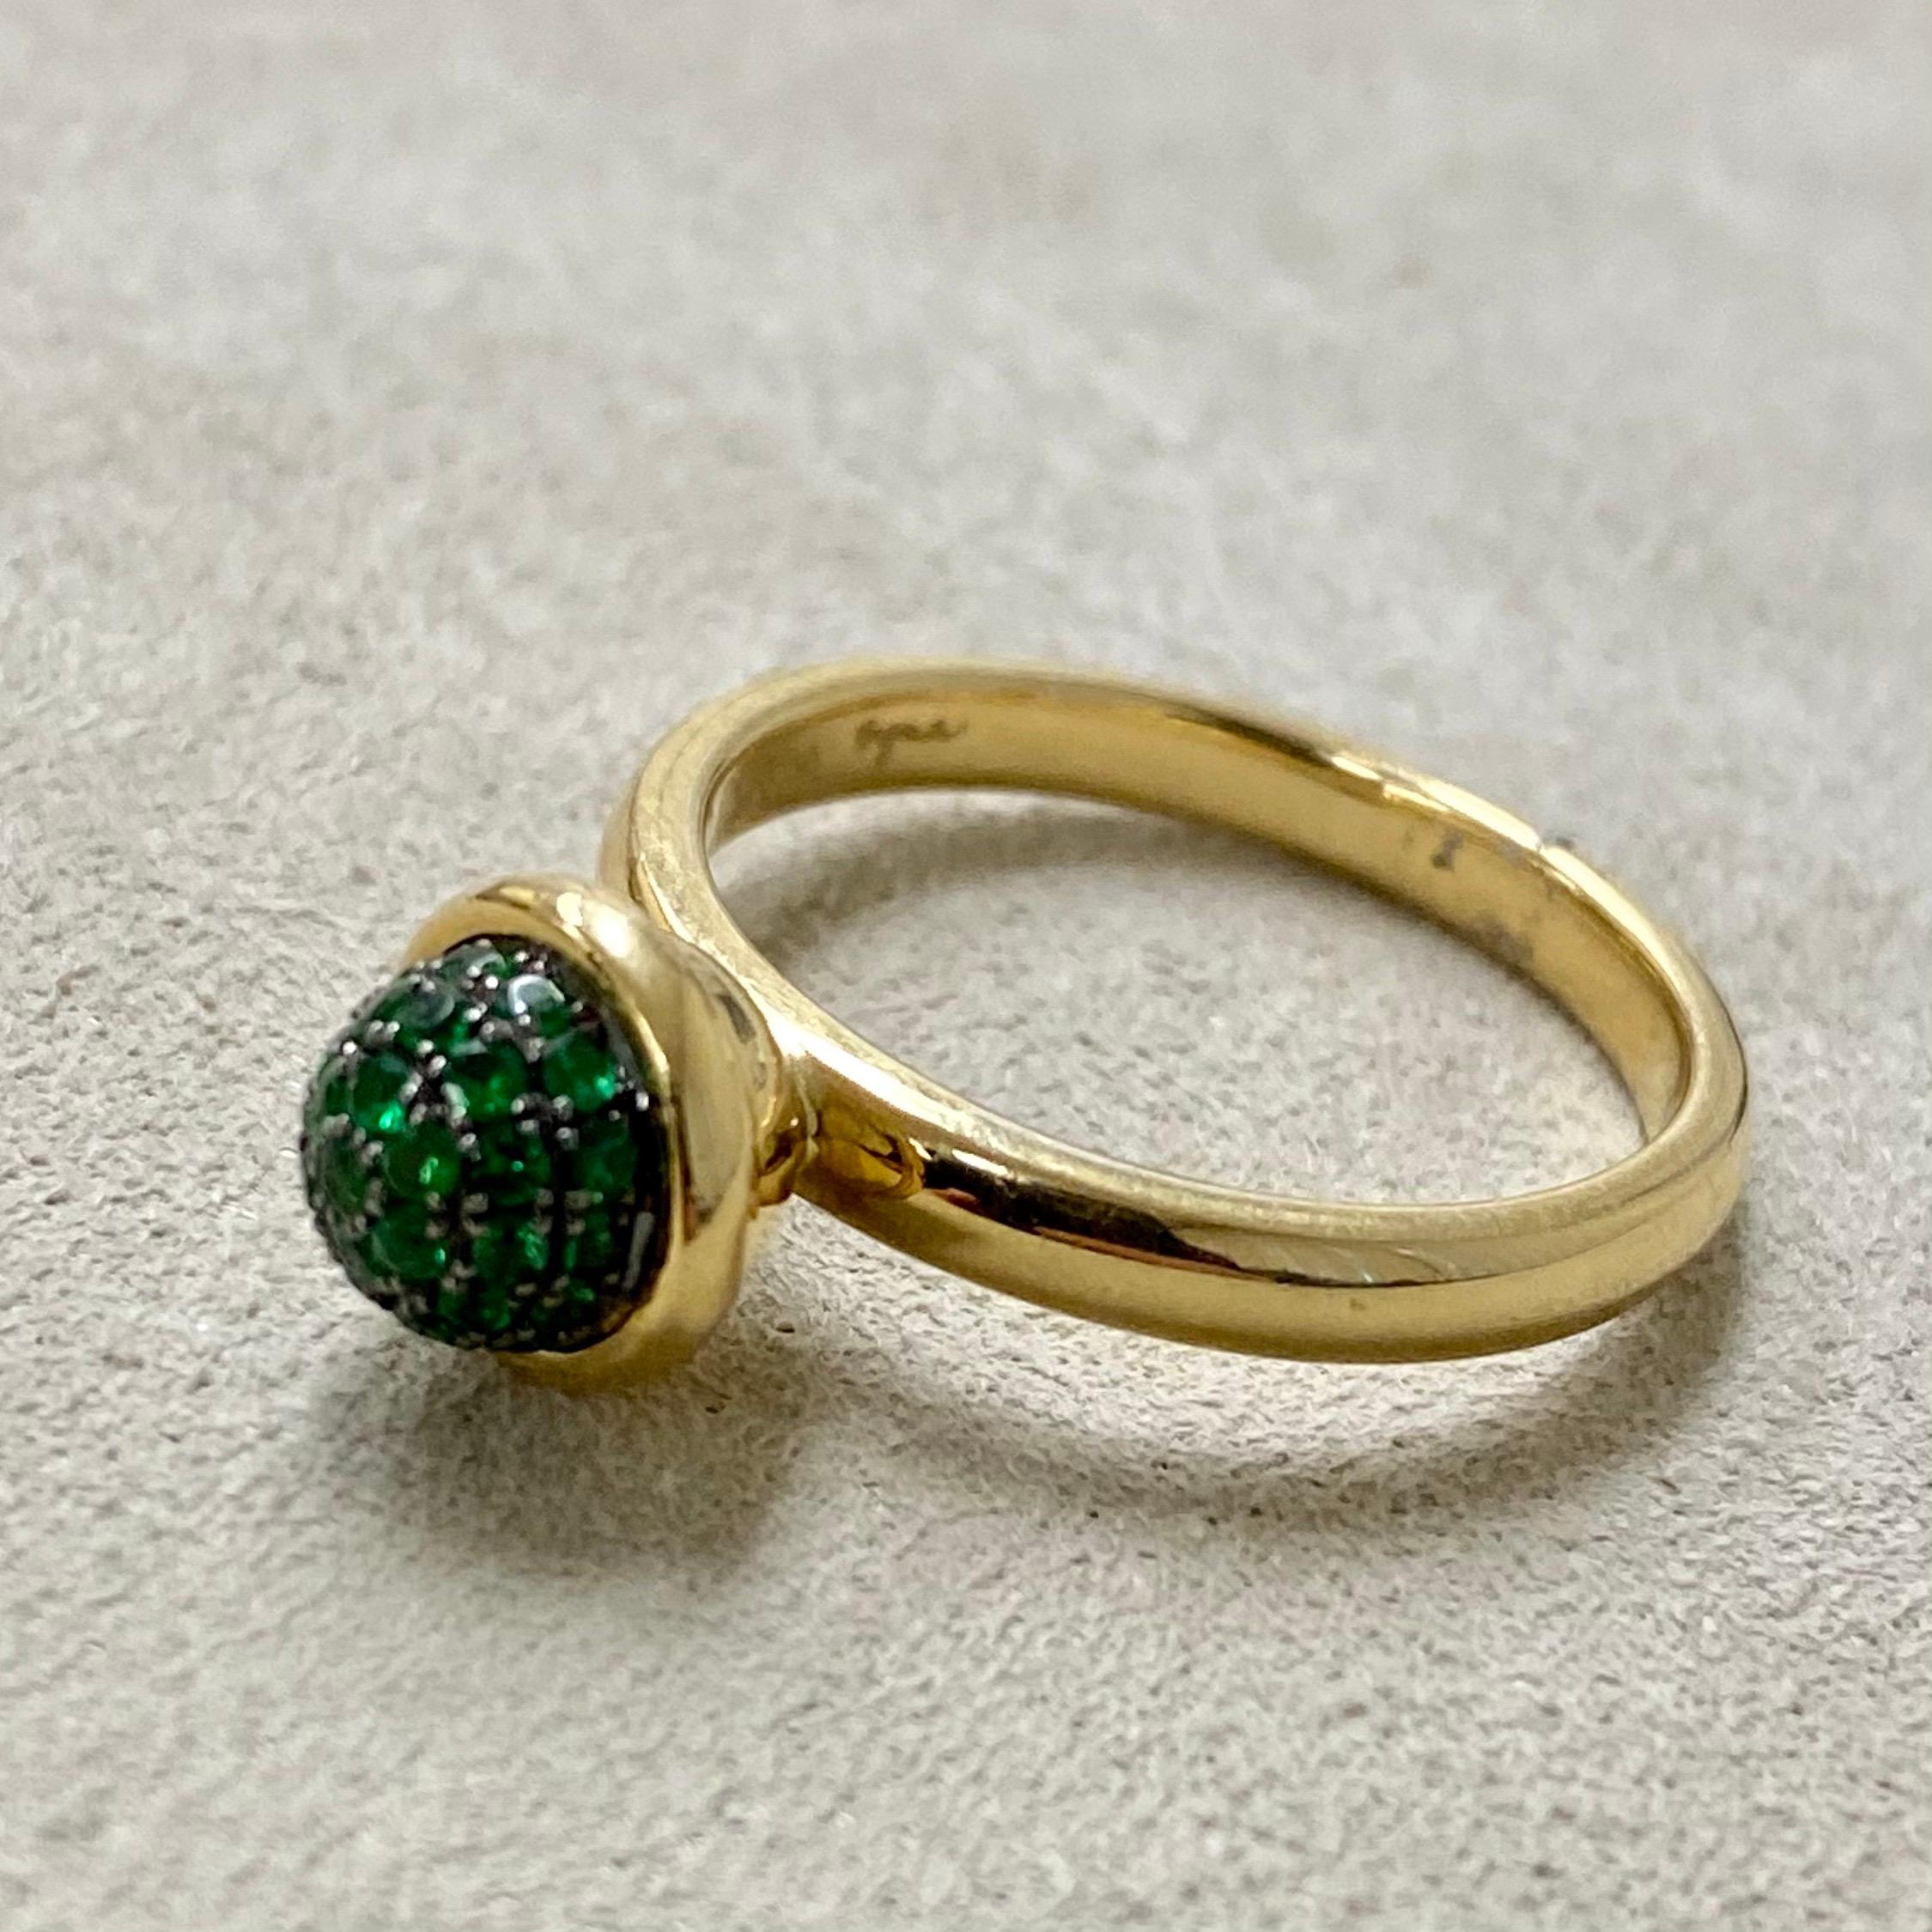 Created in 18 karat yellow gold
Tsavorite 0.30 carat approx.
Tsavorite pave ring 8 mm diameter approx.
Ring size US 6.5, can be sized upon request.

18 karat yellow gold, this luminescent ring boasts a 0.30 carat Tsavorite gemstone and an 8mm